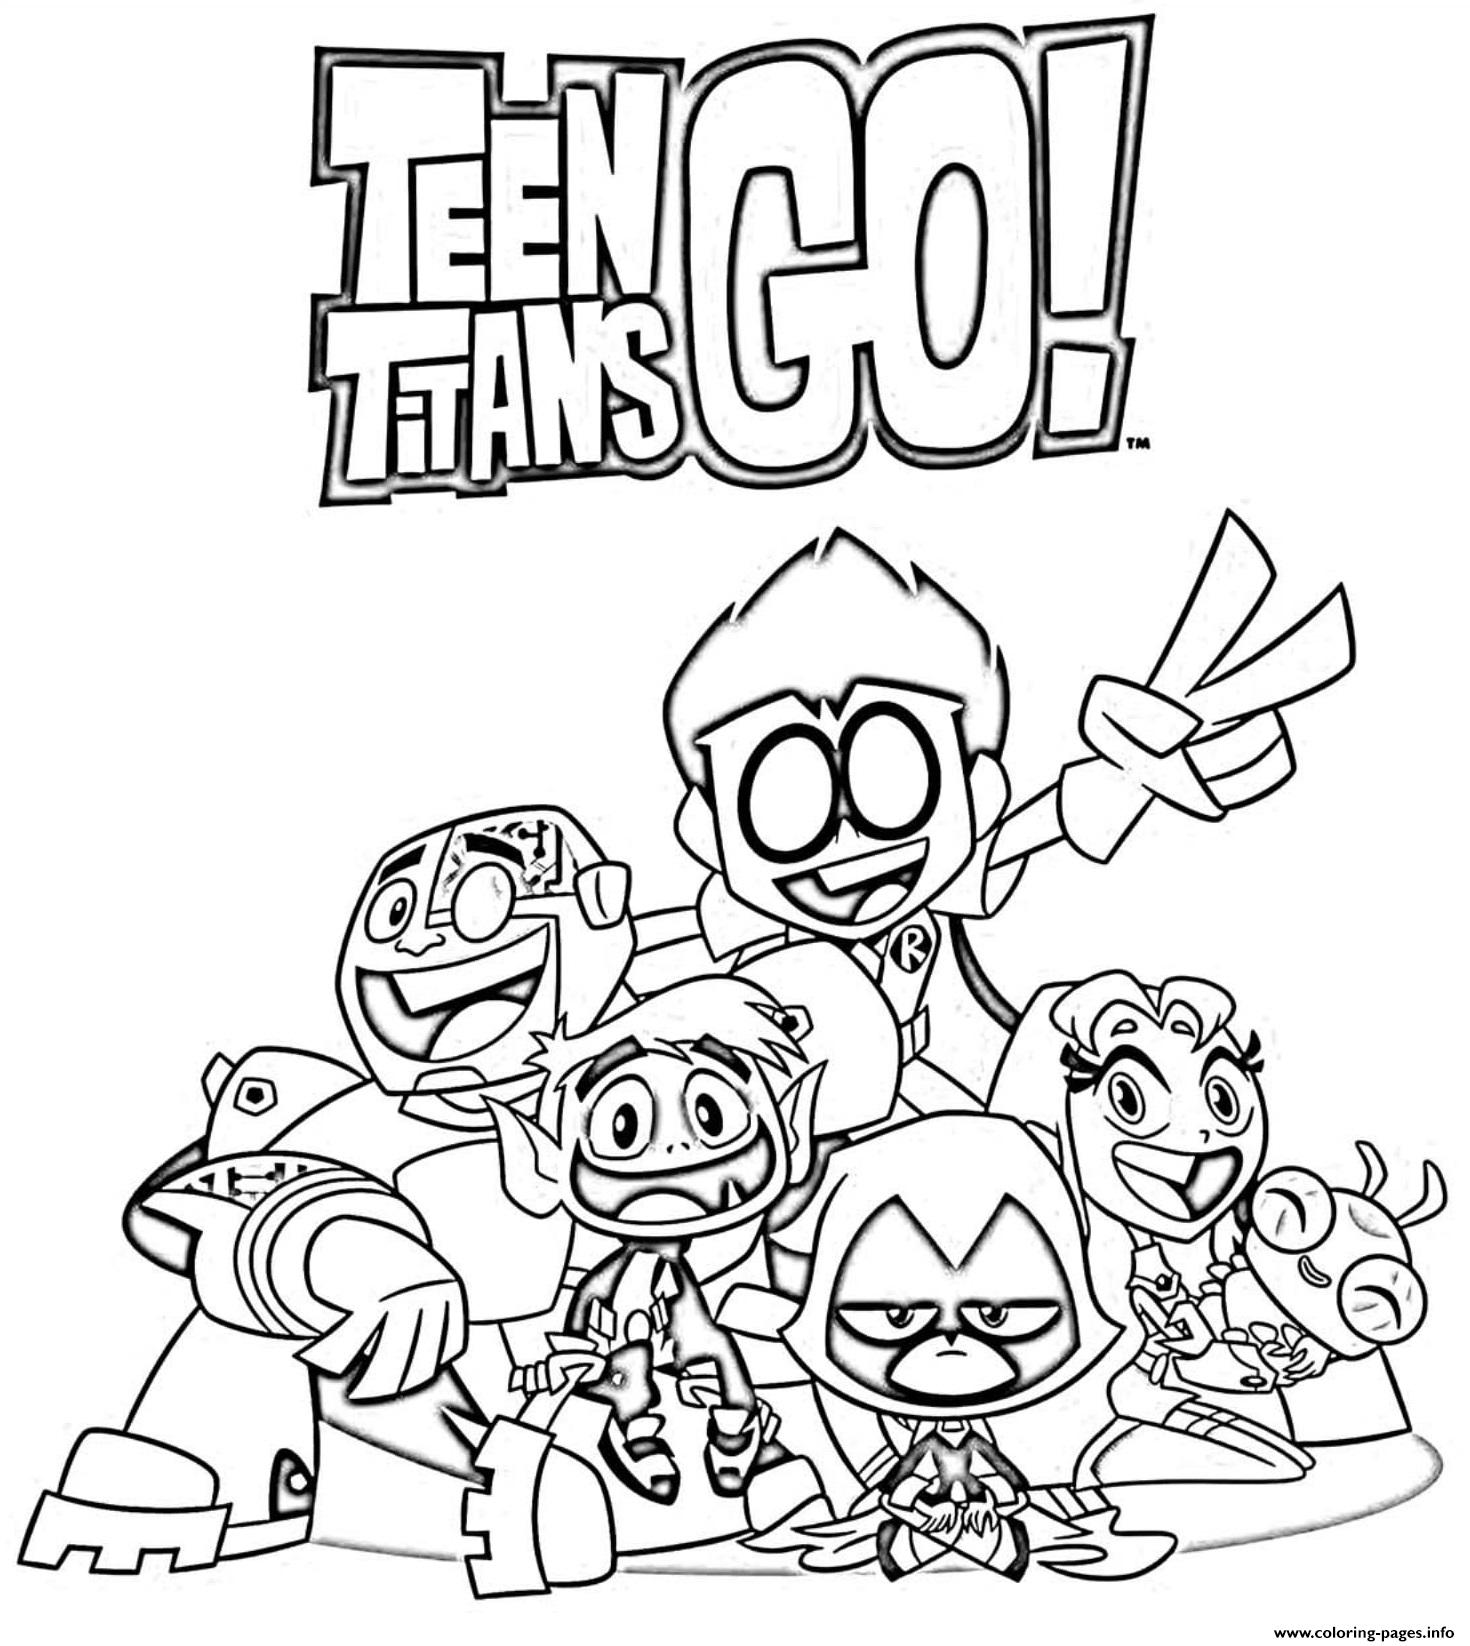 Teen Titans Go Cartoon Coloring Pages Printable - Coloring Home